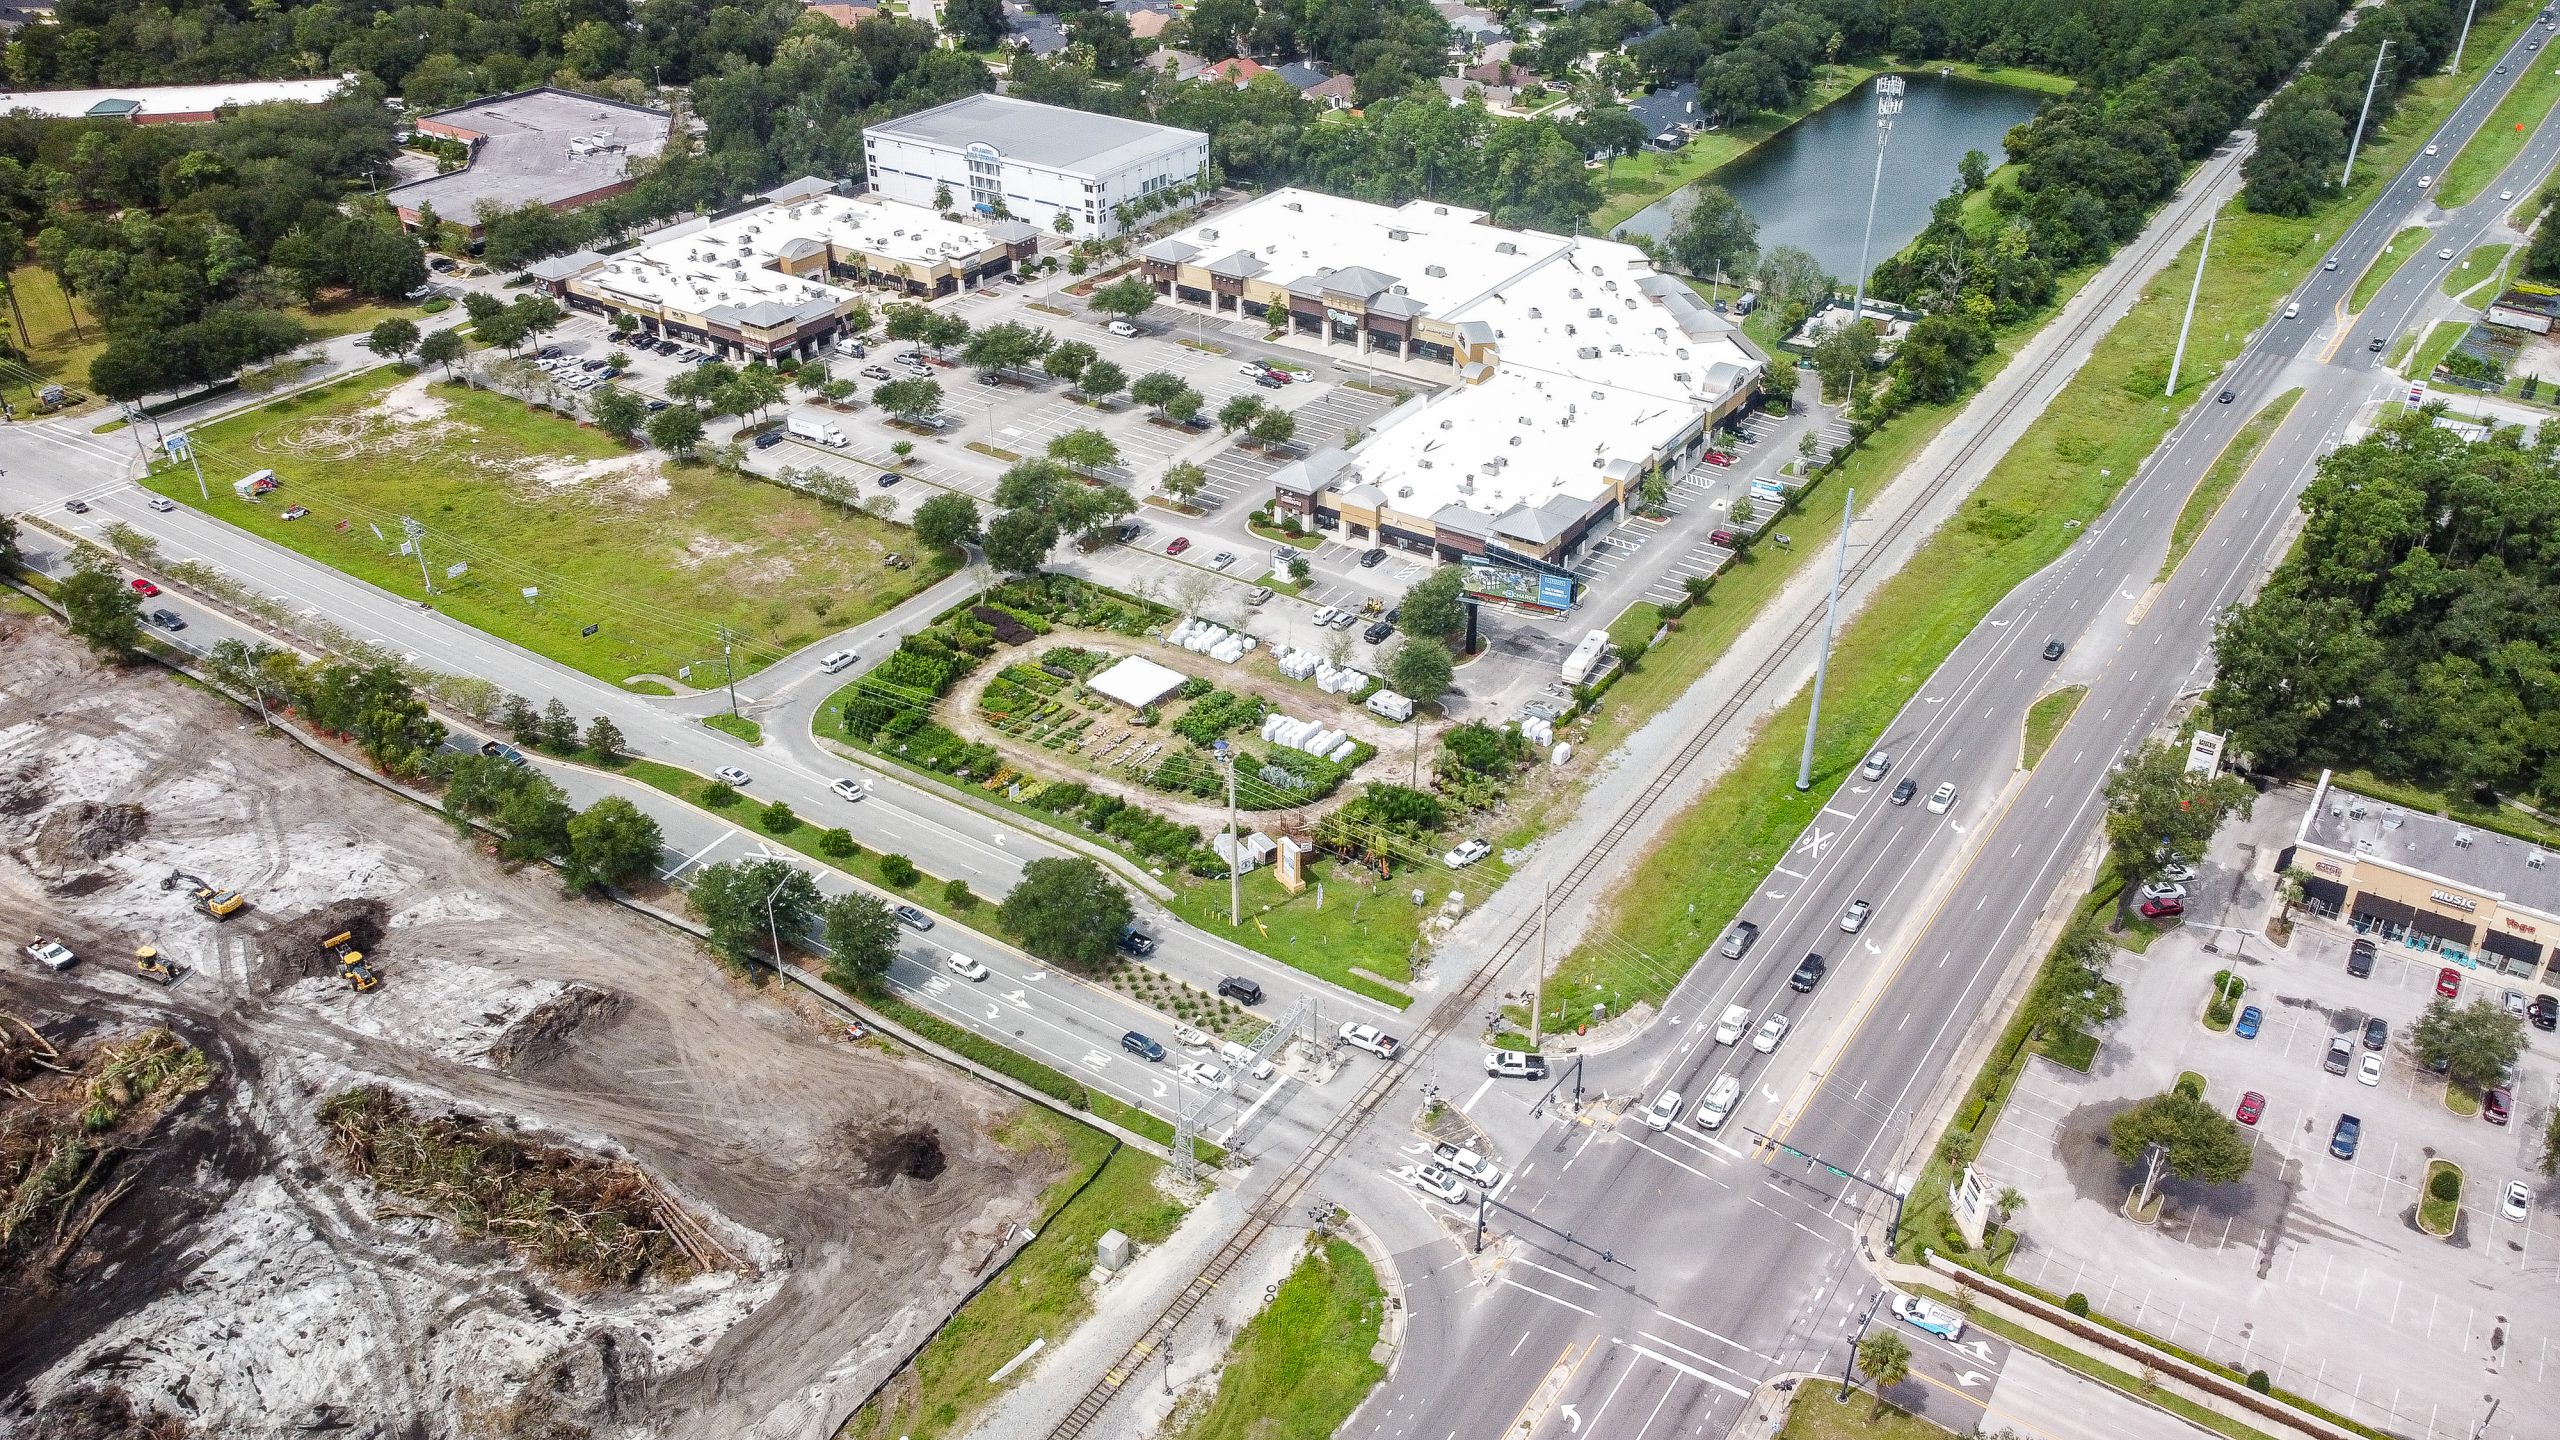 An aerial view of a shopping center and intersection.